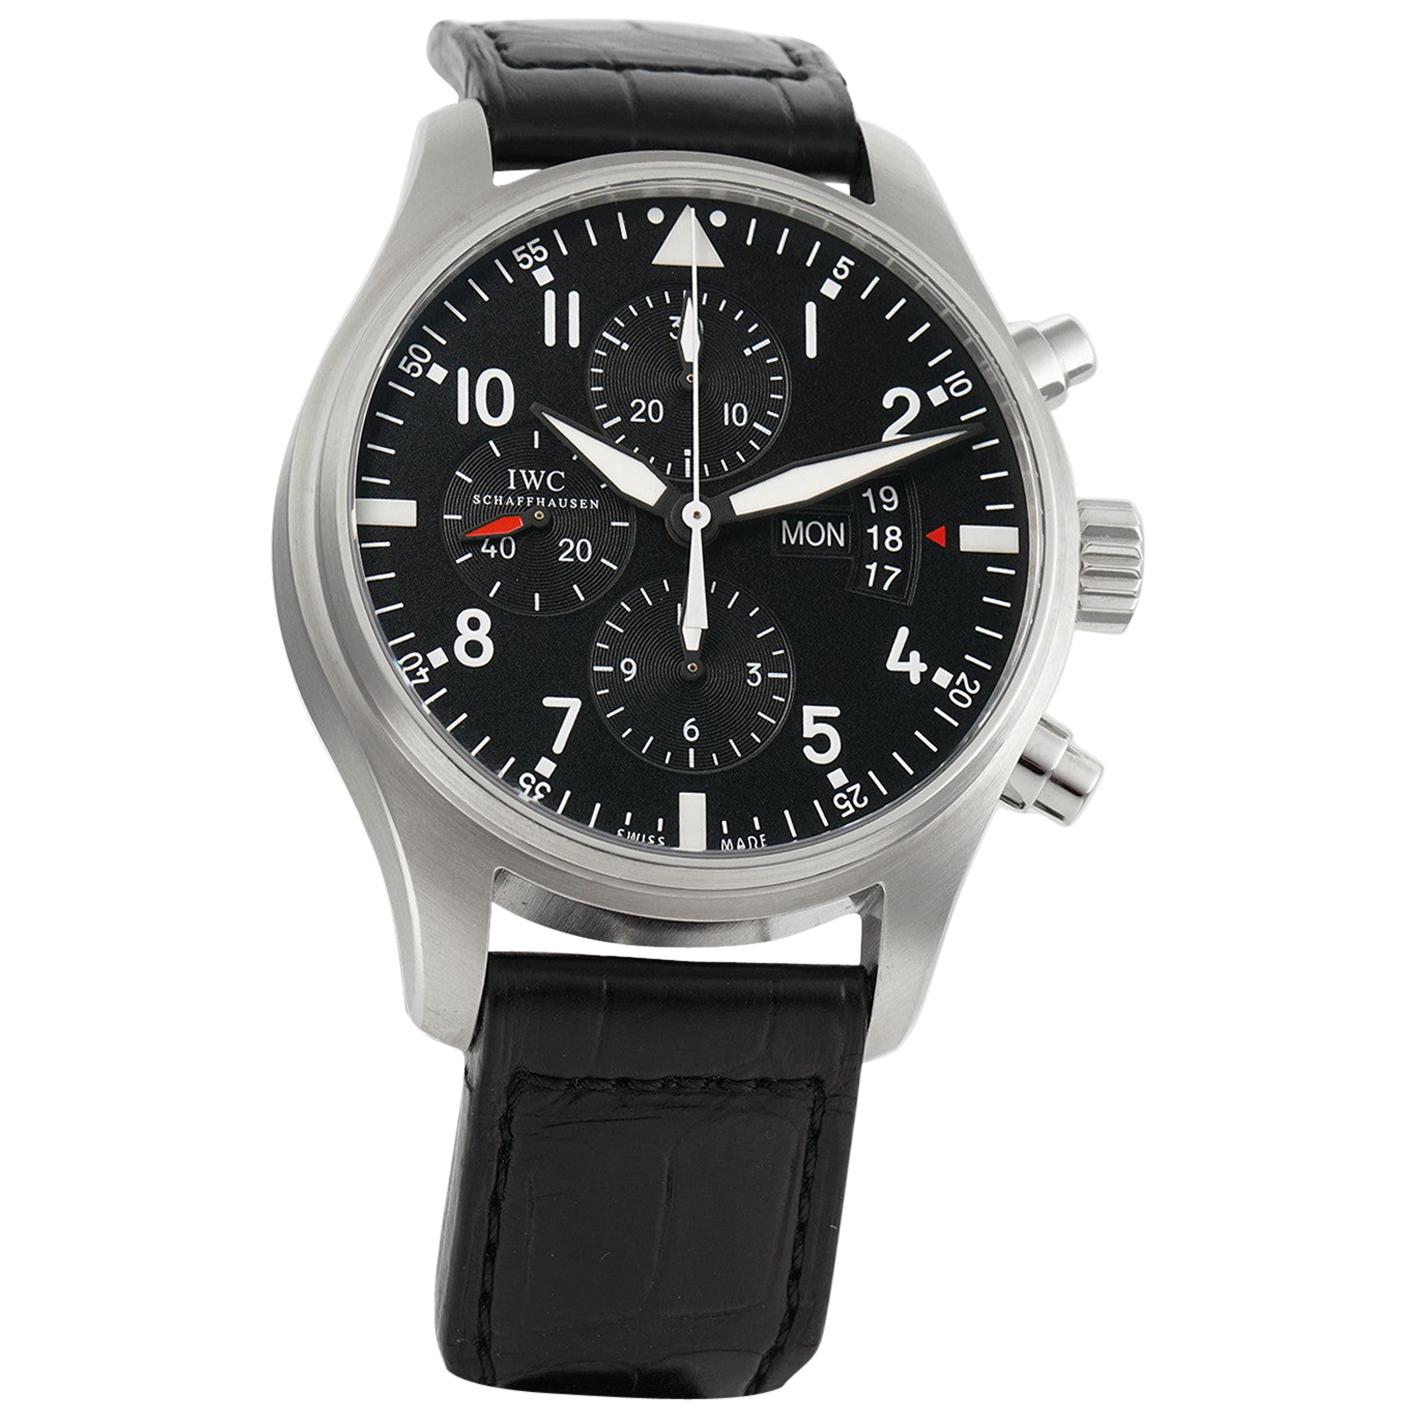 IWC Pilot IW377701, Black Dial, Certified and Warranty